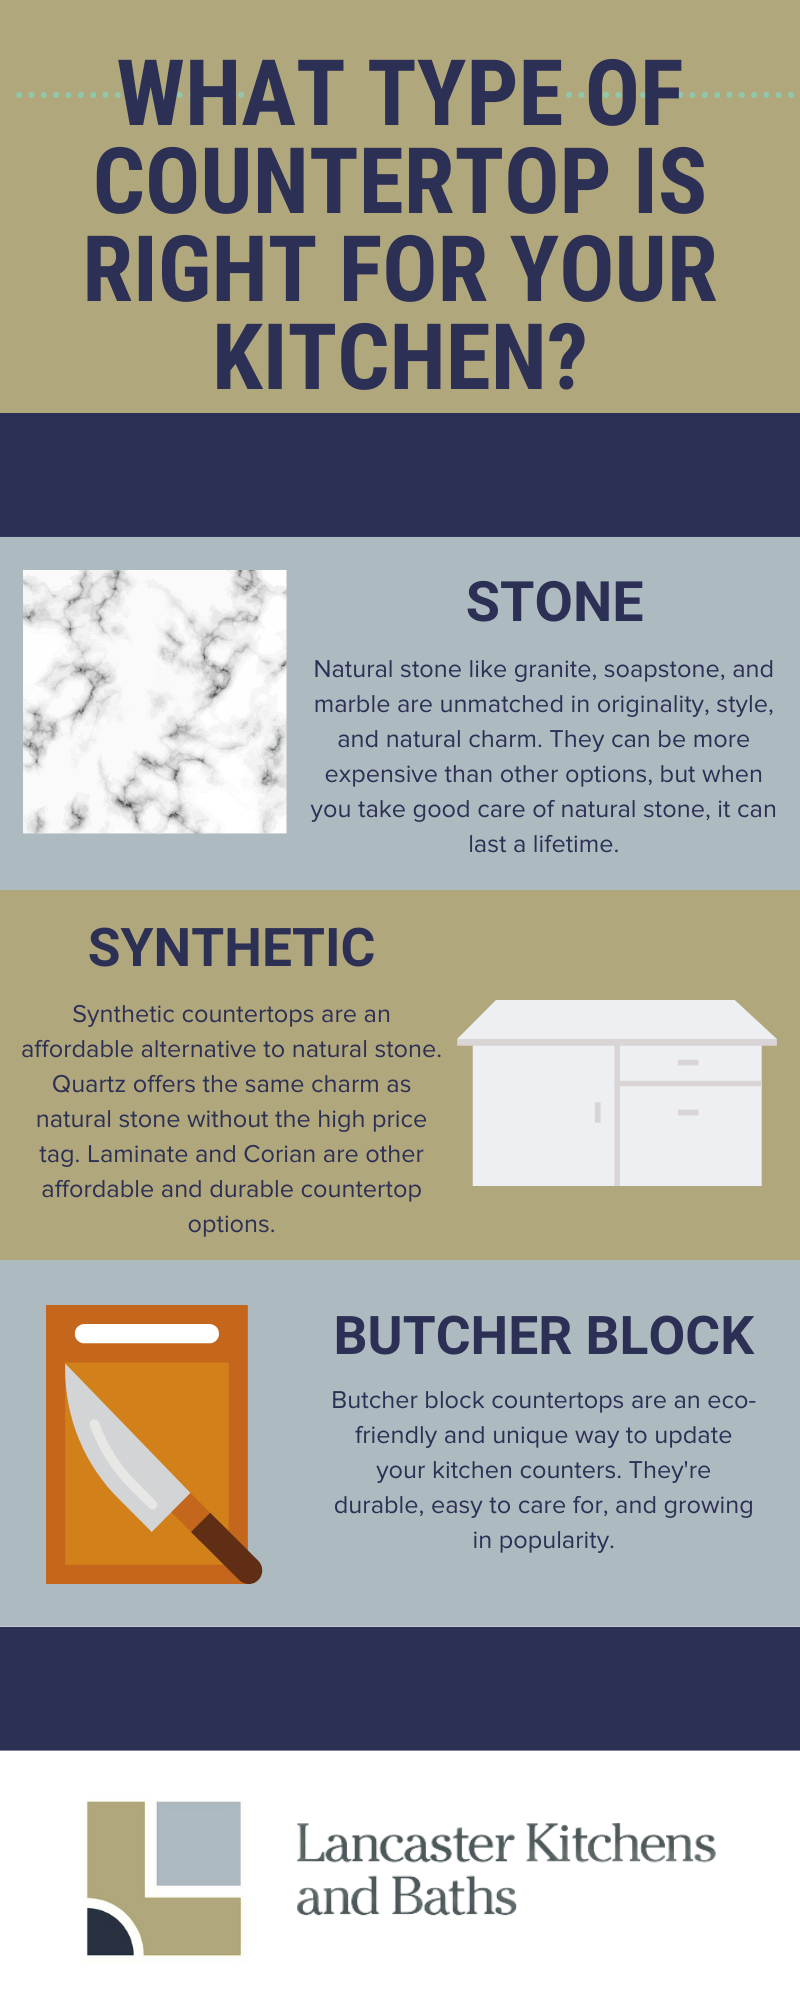 An infographic detailing the different types of countertops for a kitchen, including stone, synthetic, and butcher block